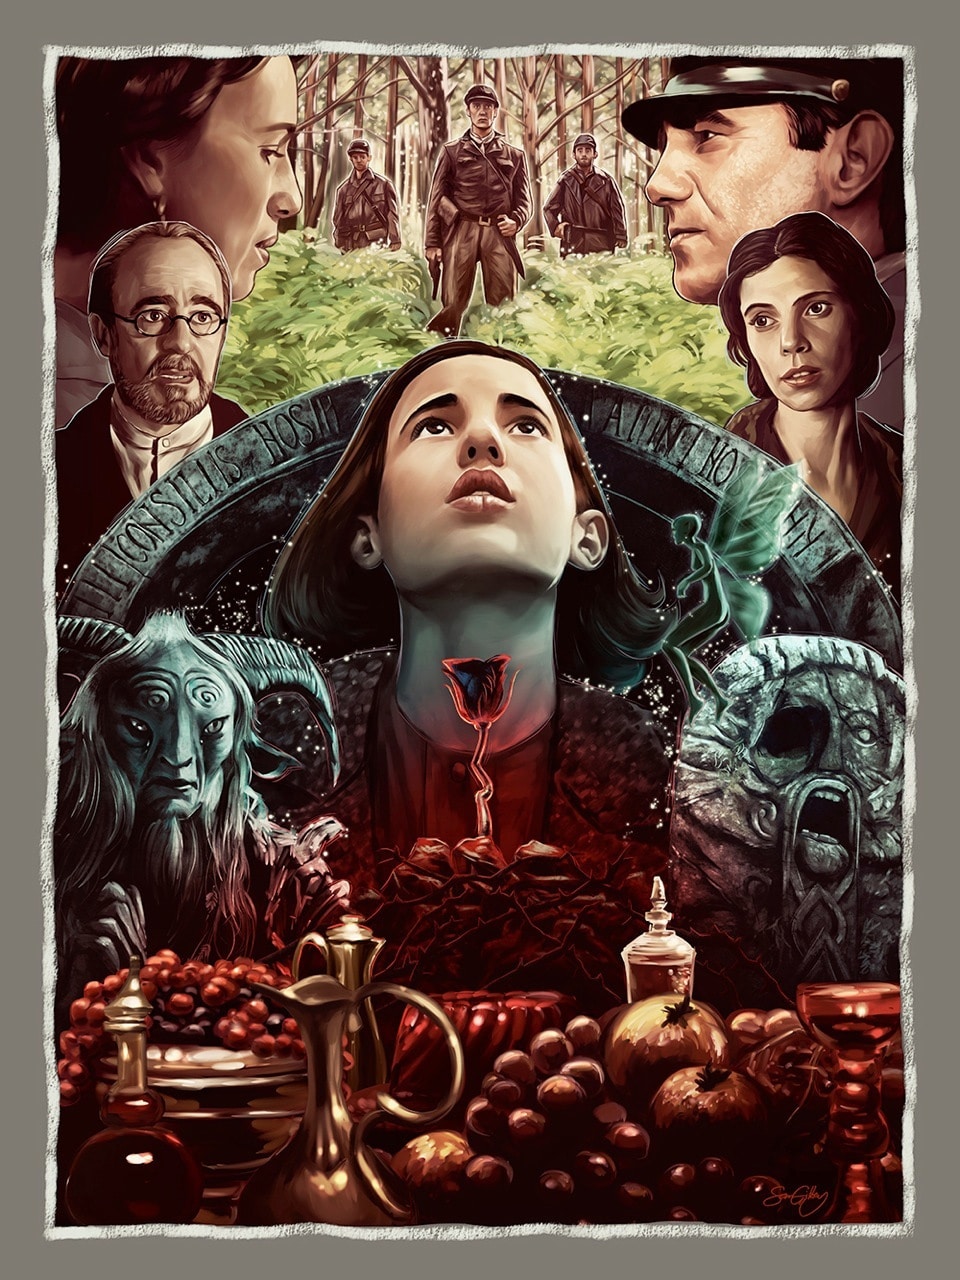 Pans Labyrinth Movie Poster